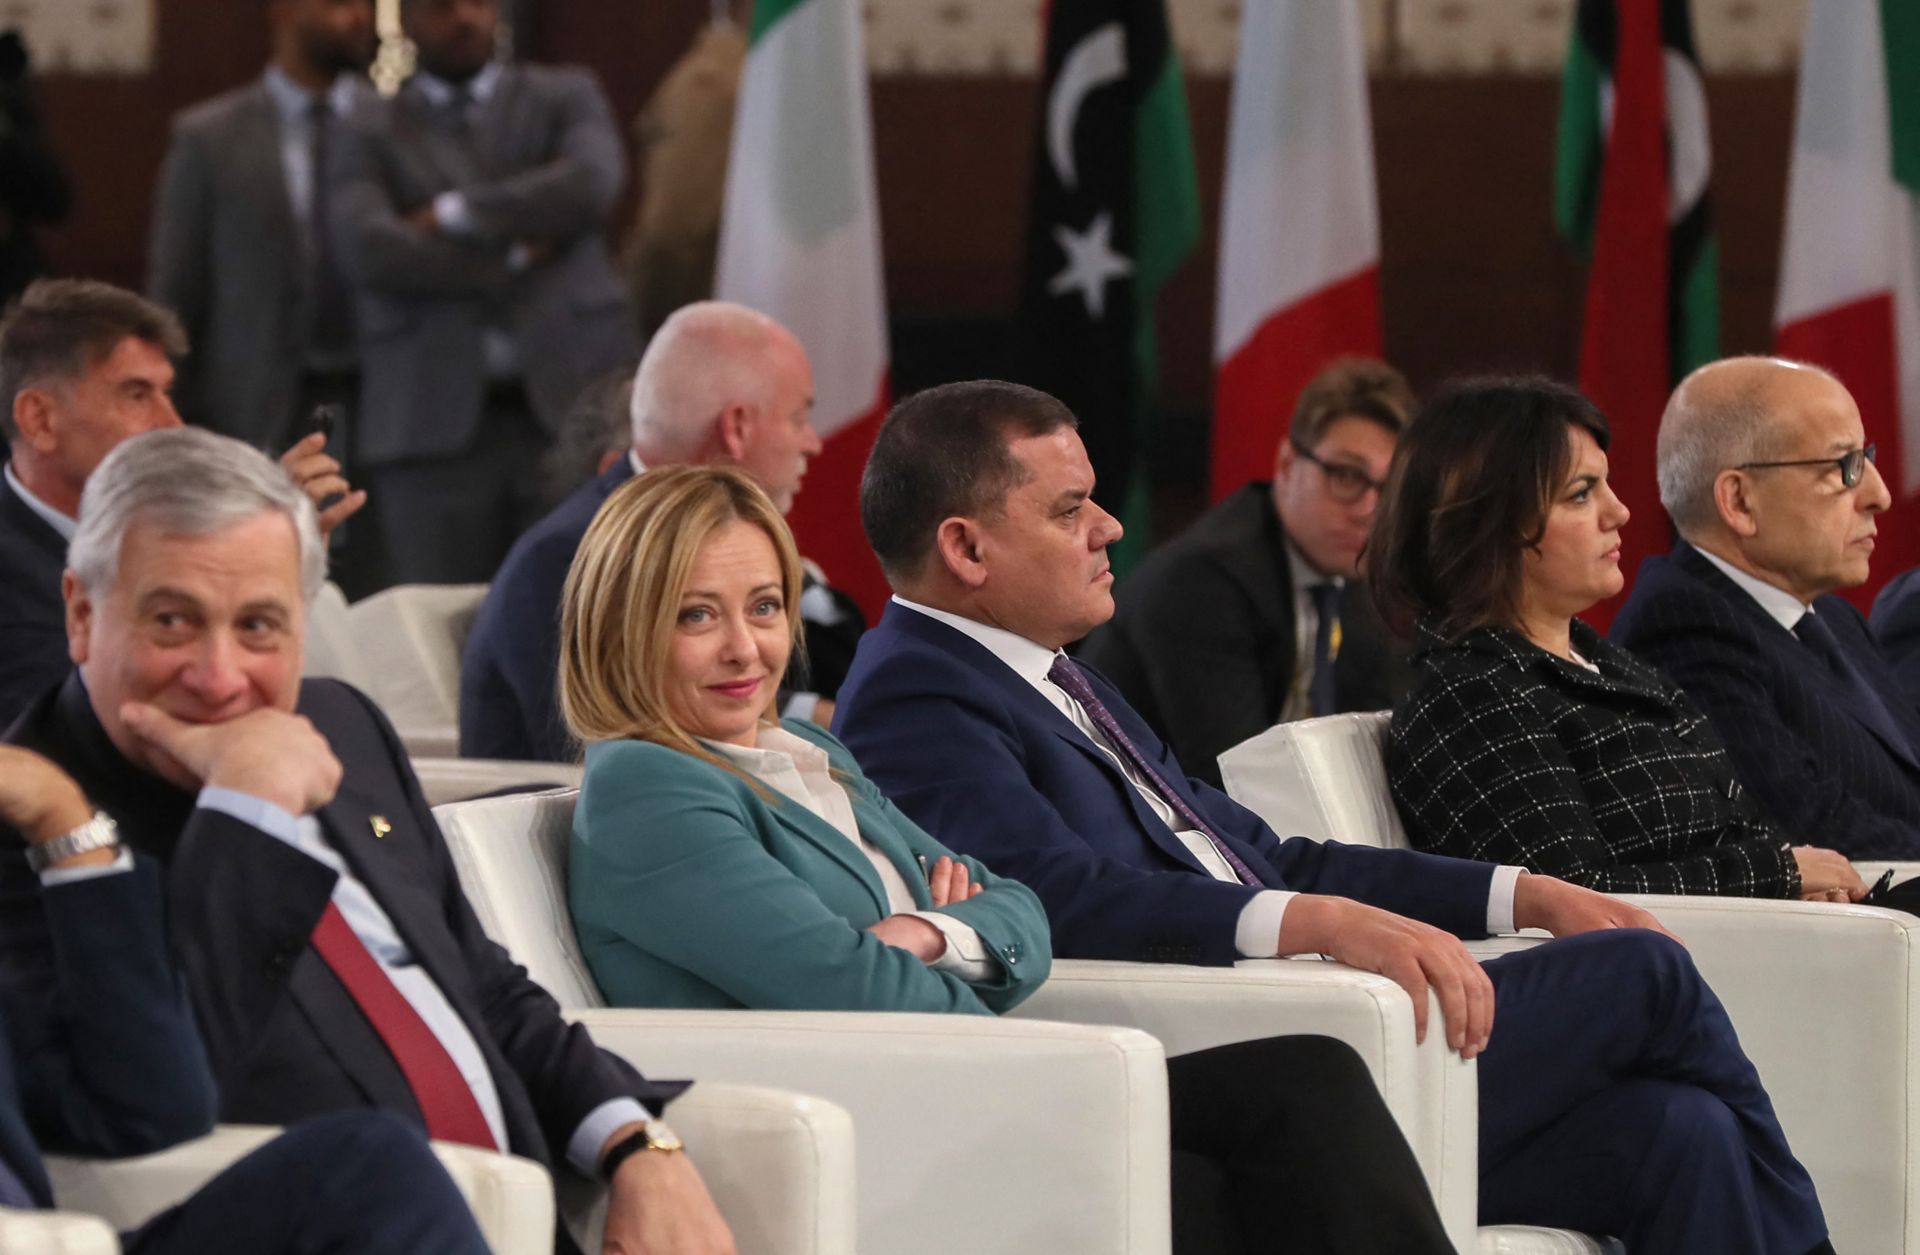 Italian Prime Minister Giorgia Meloni (2nd L) and Libya's Tripoli-based Prime Minister Abdul Hamid Dbeibah (3rd L) attend an agreement-signing ceremony between Italian multinational oil and gas company Eni and the Libyan National Oil Corporation in Tripoli, Libya, on Jan. 28, 2023.